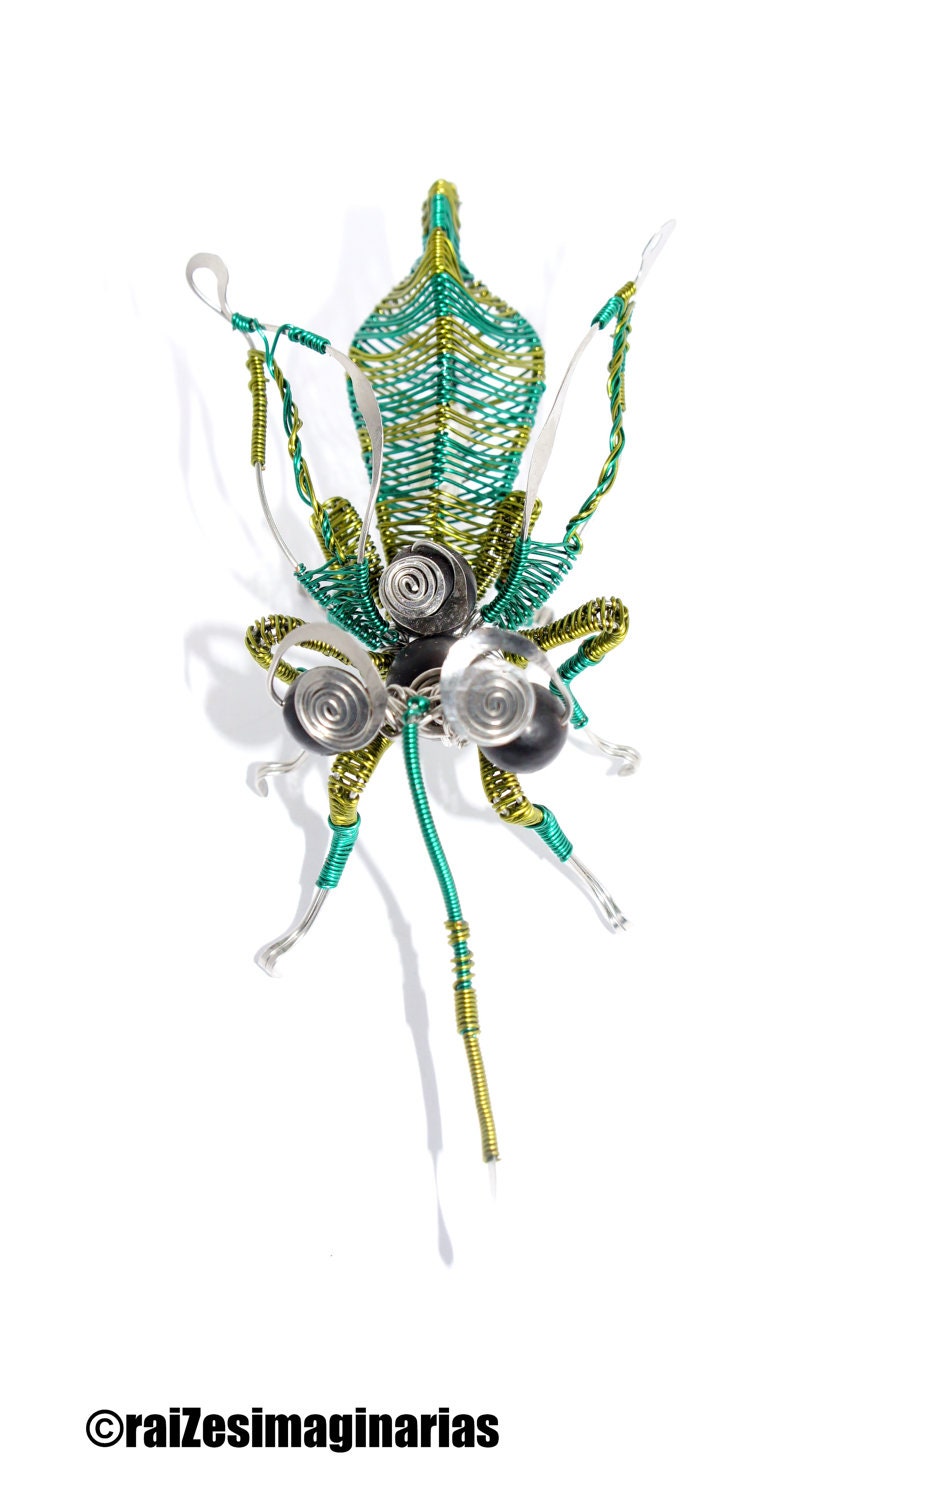 fly wire wrap sculpture stainless steel, green colored copper wire and natural pearls - raizesimaginarias